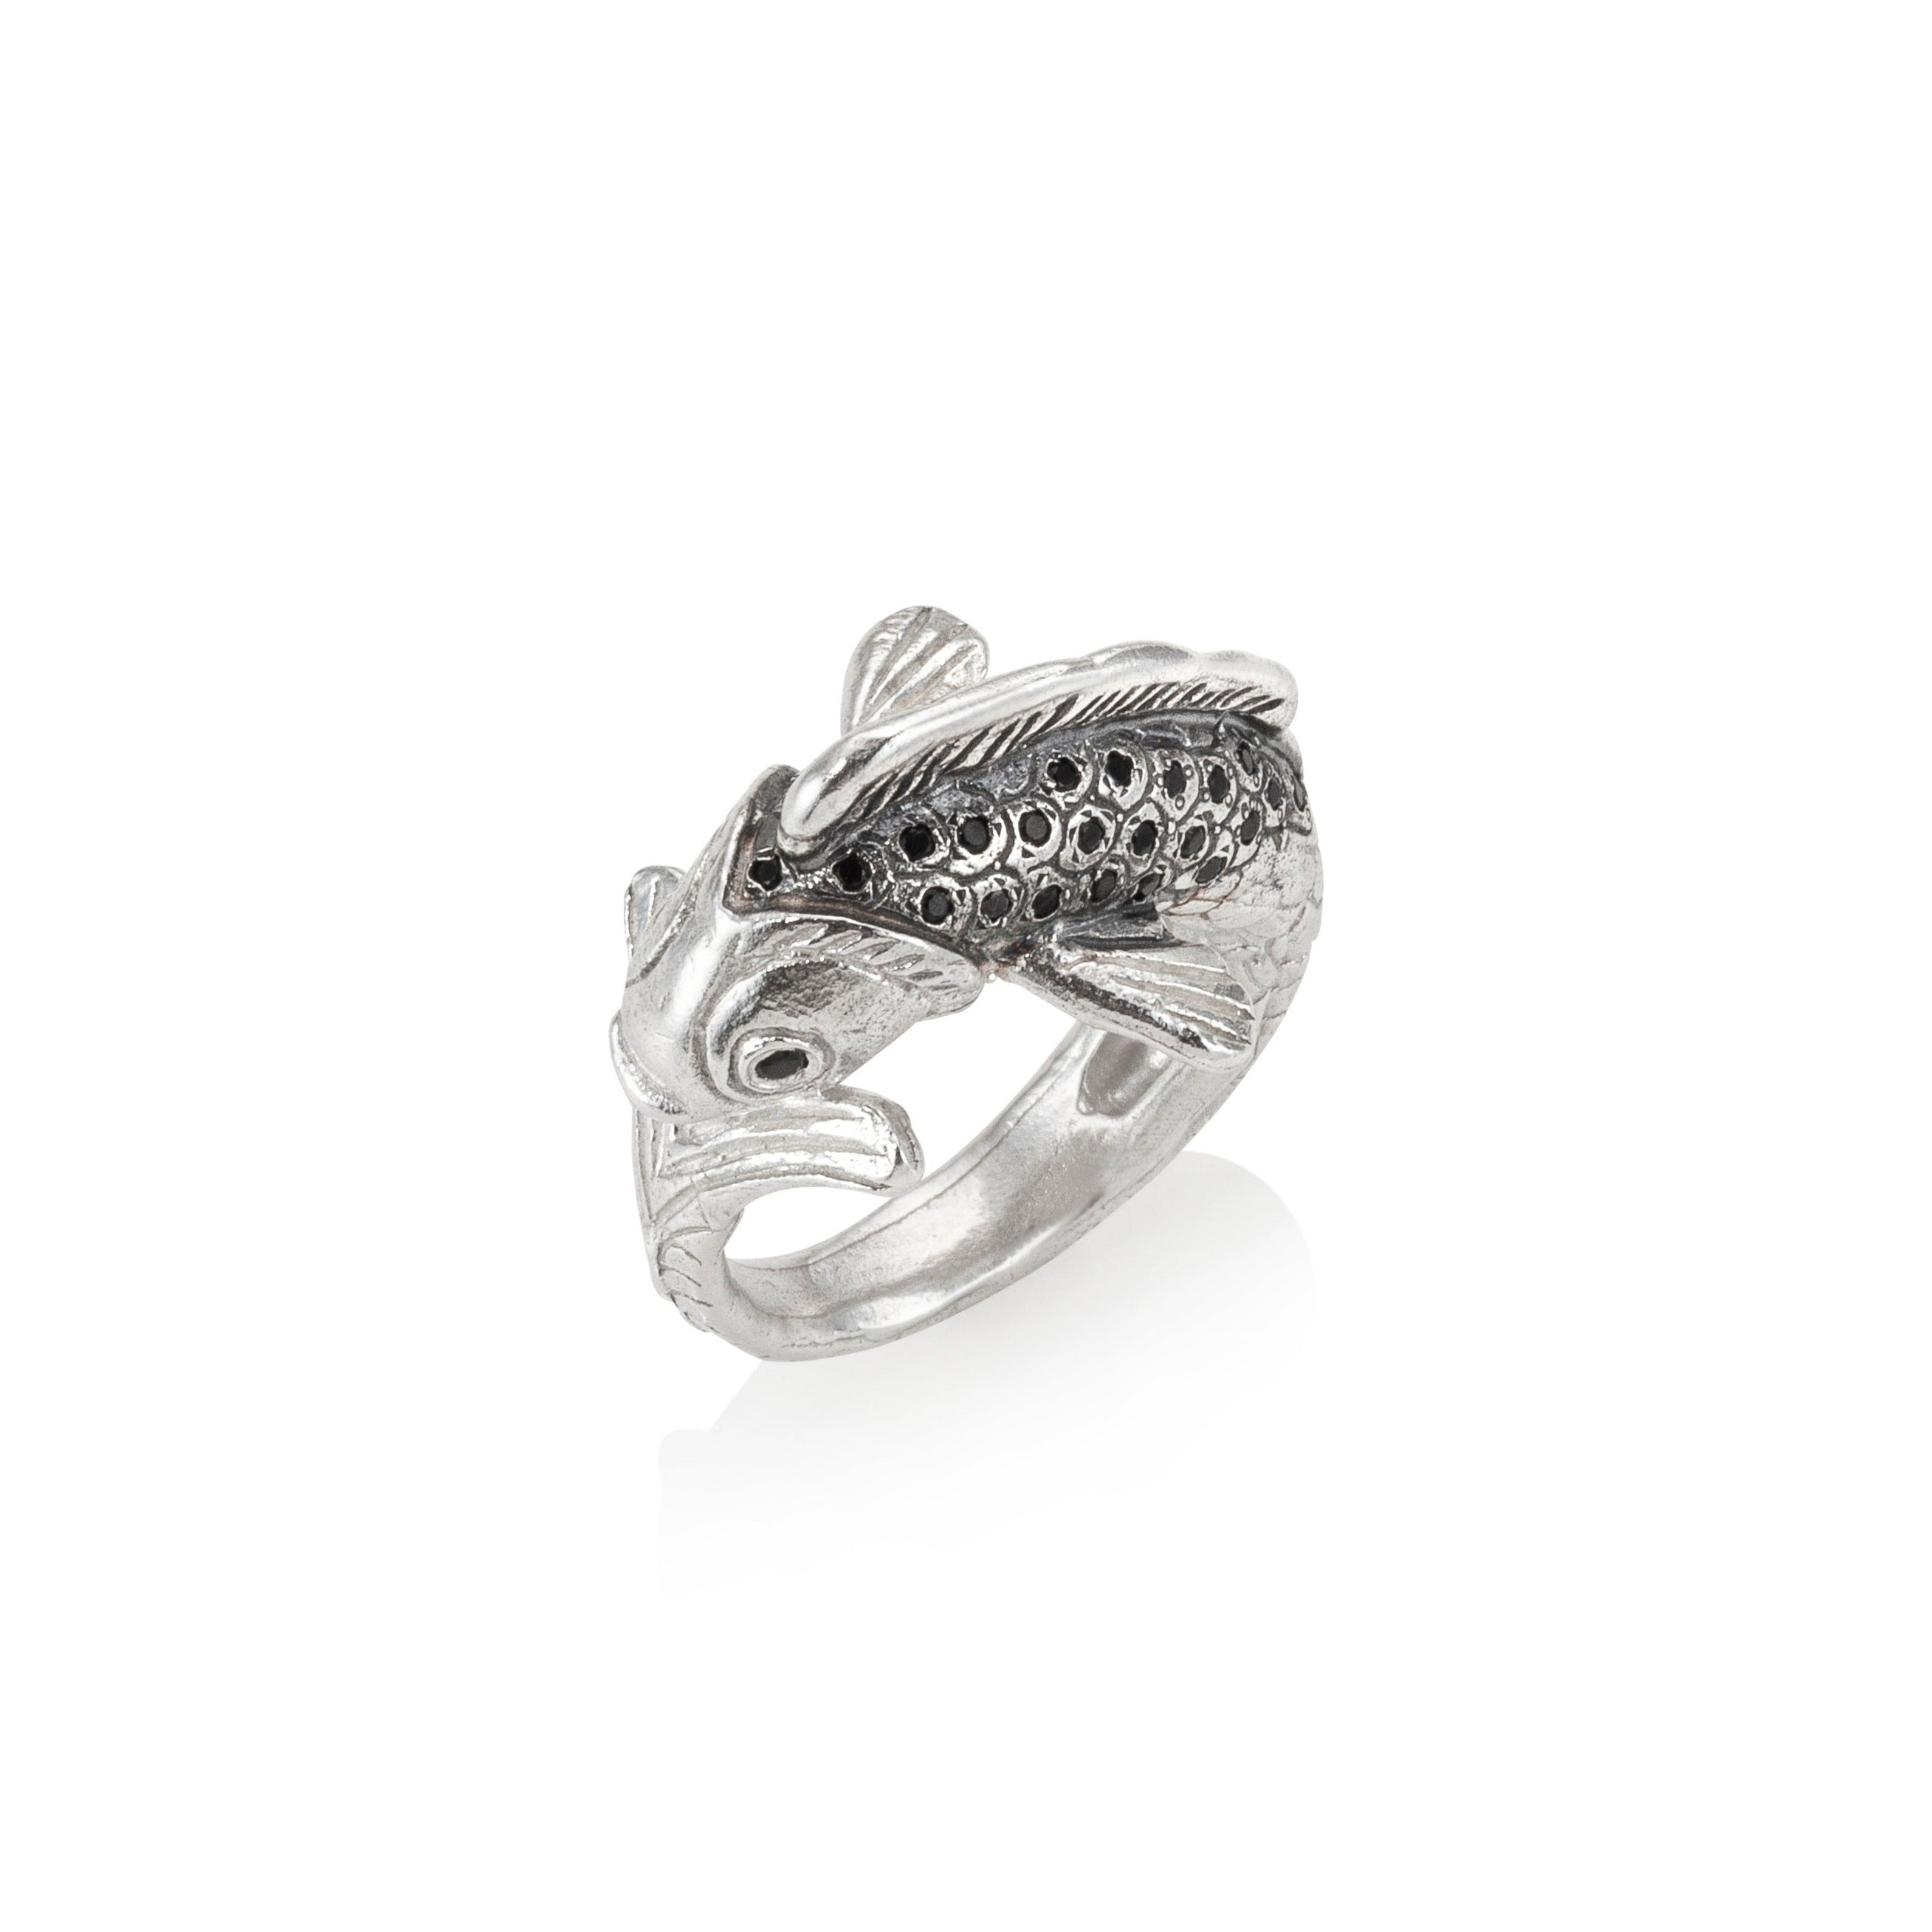 Koi Fish Ring - Handcrafted in Sterling Silver | Shop | Goldfish Jewellery